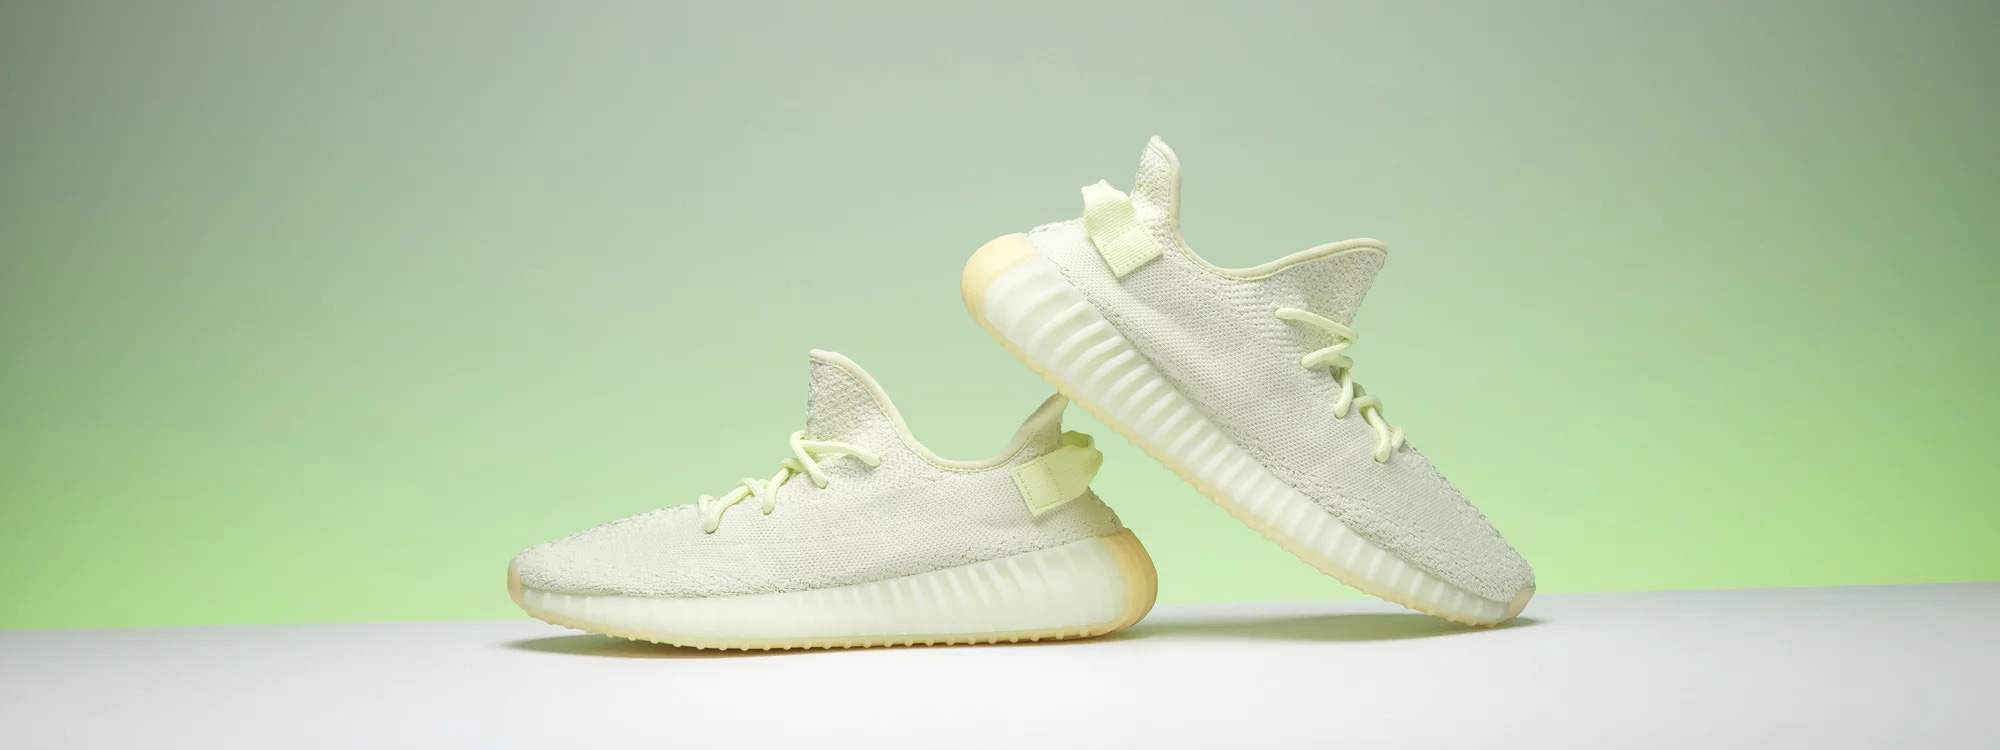 The best Adidas Yeezy Boost 350 V2 Butter sneakers